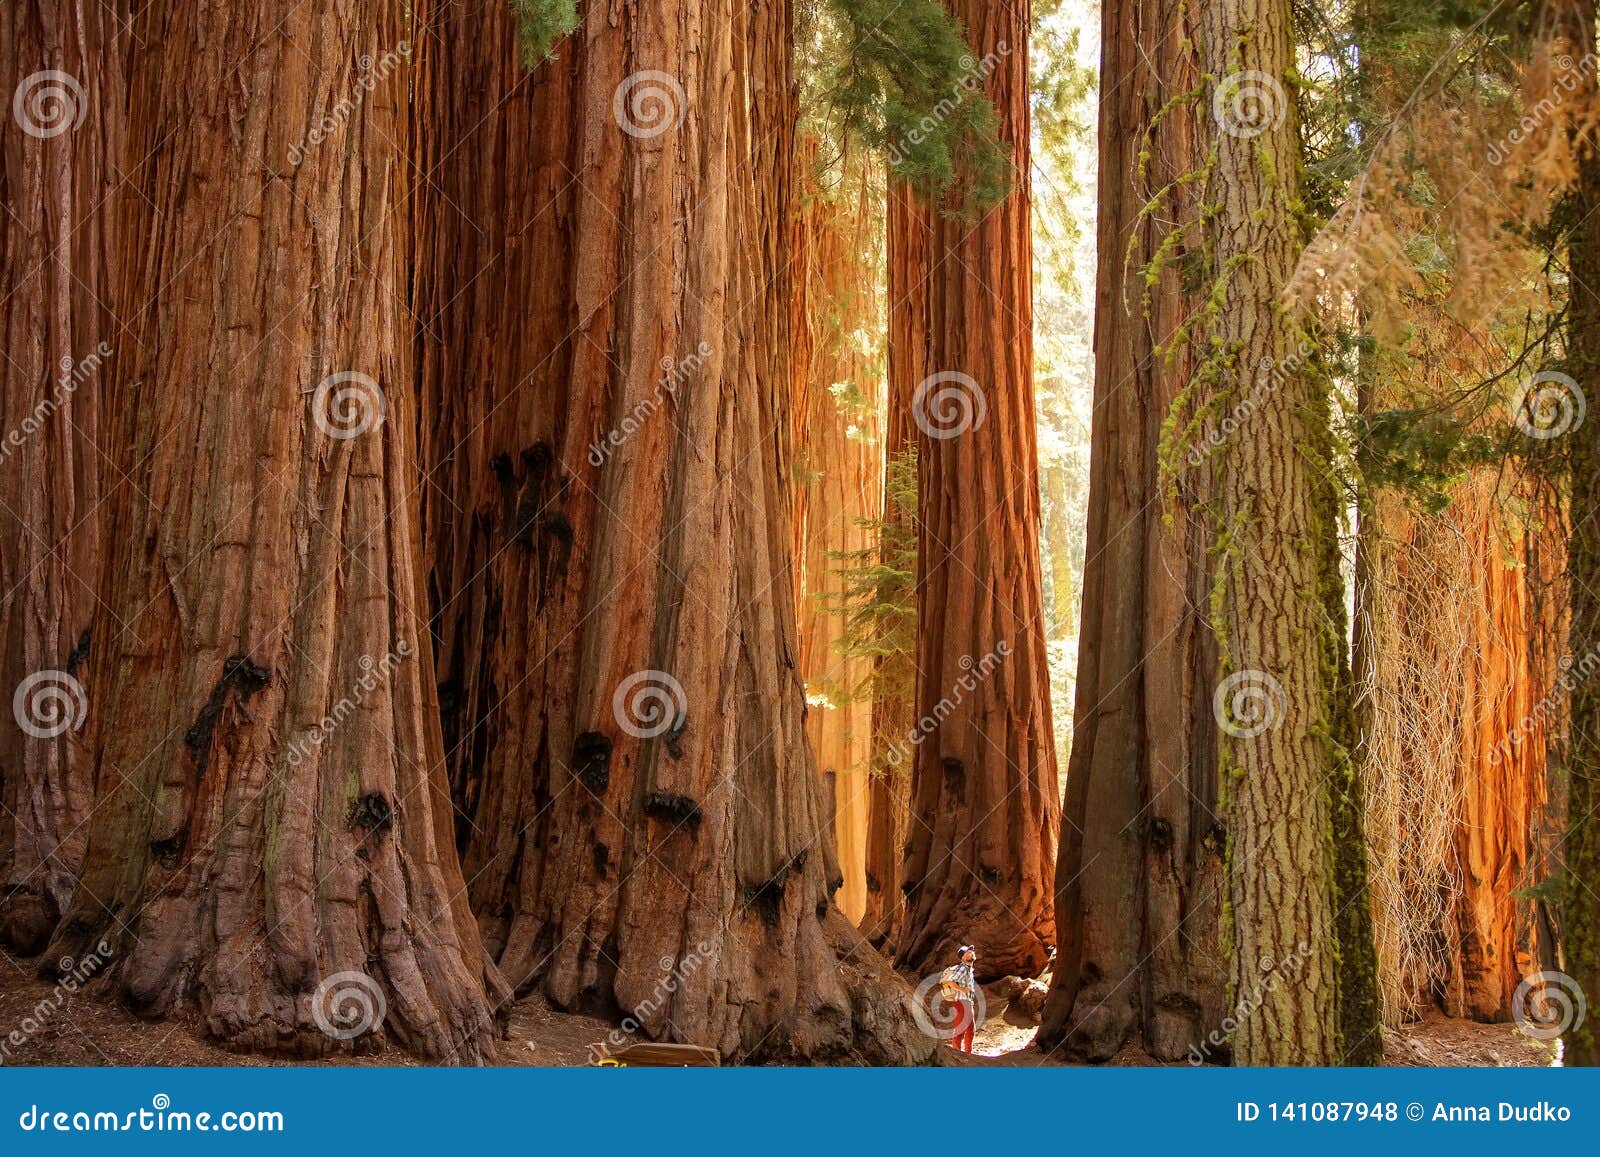 hiker in sequoia national park in california, usa